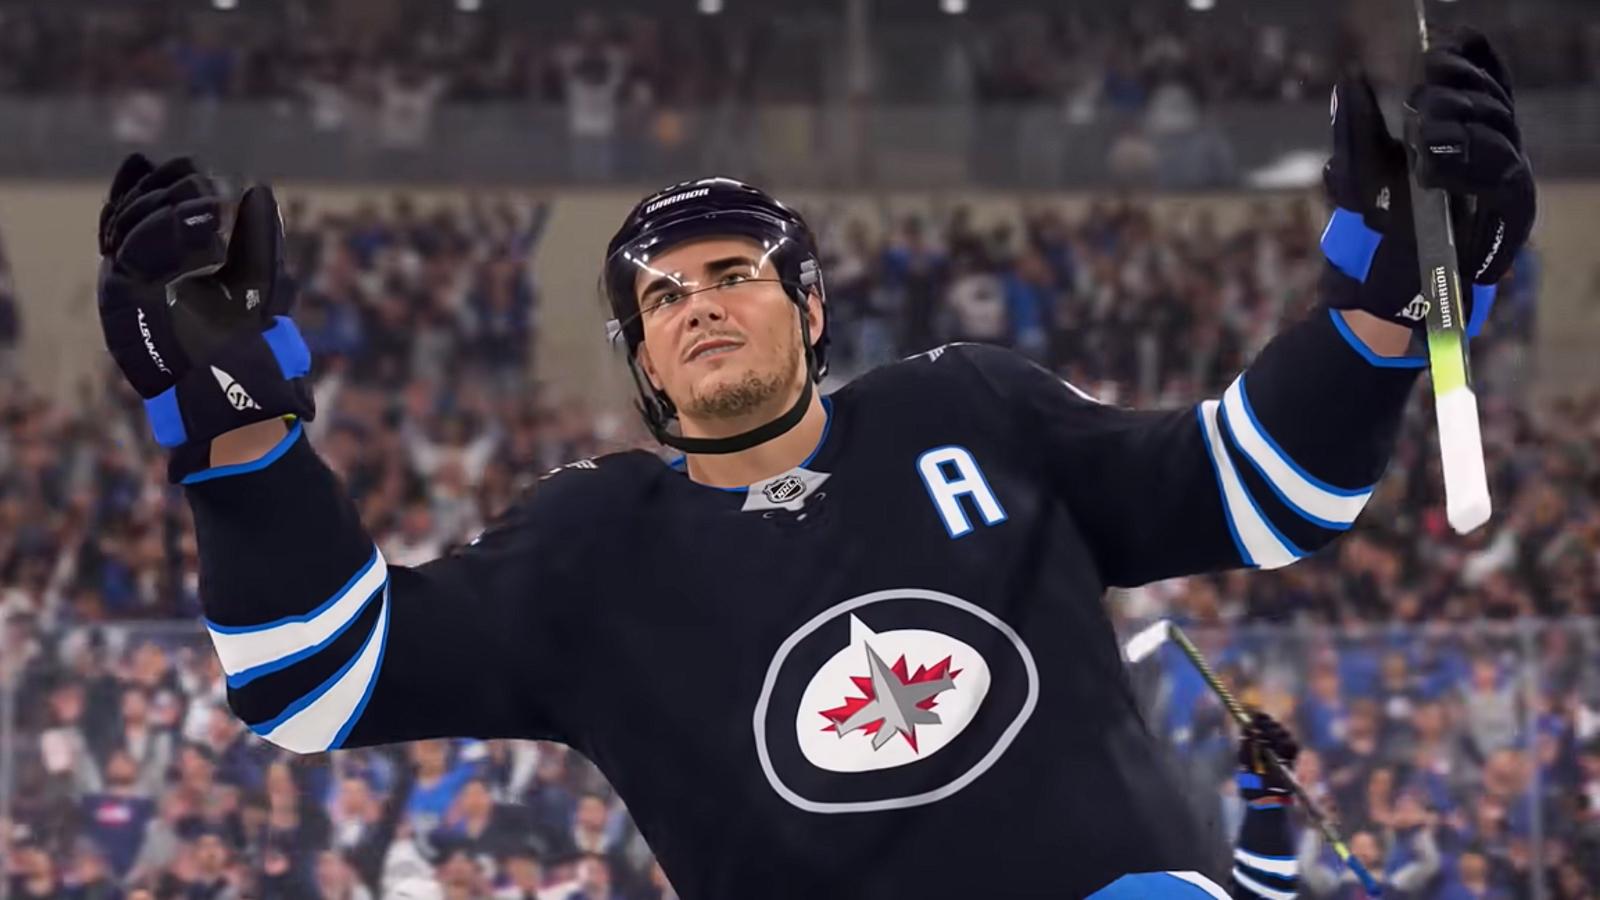 Top 10 NHL players of 2022